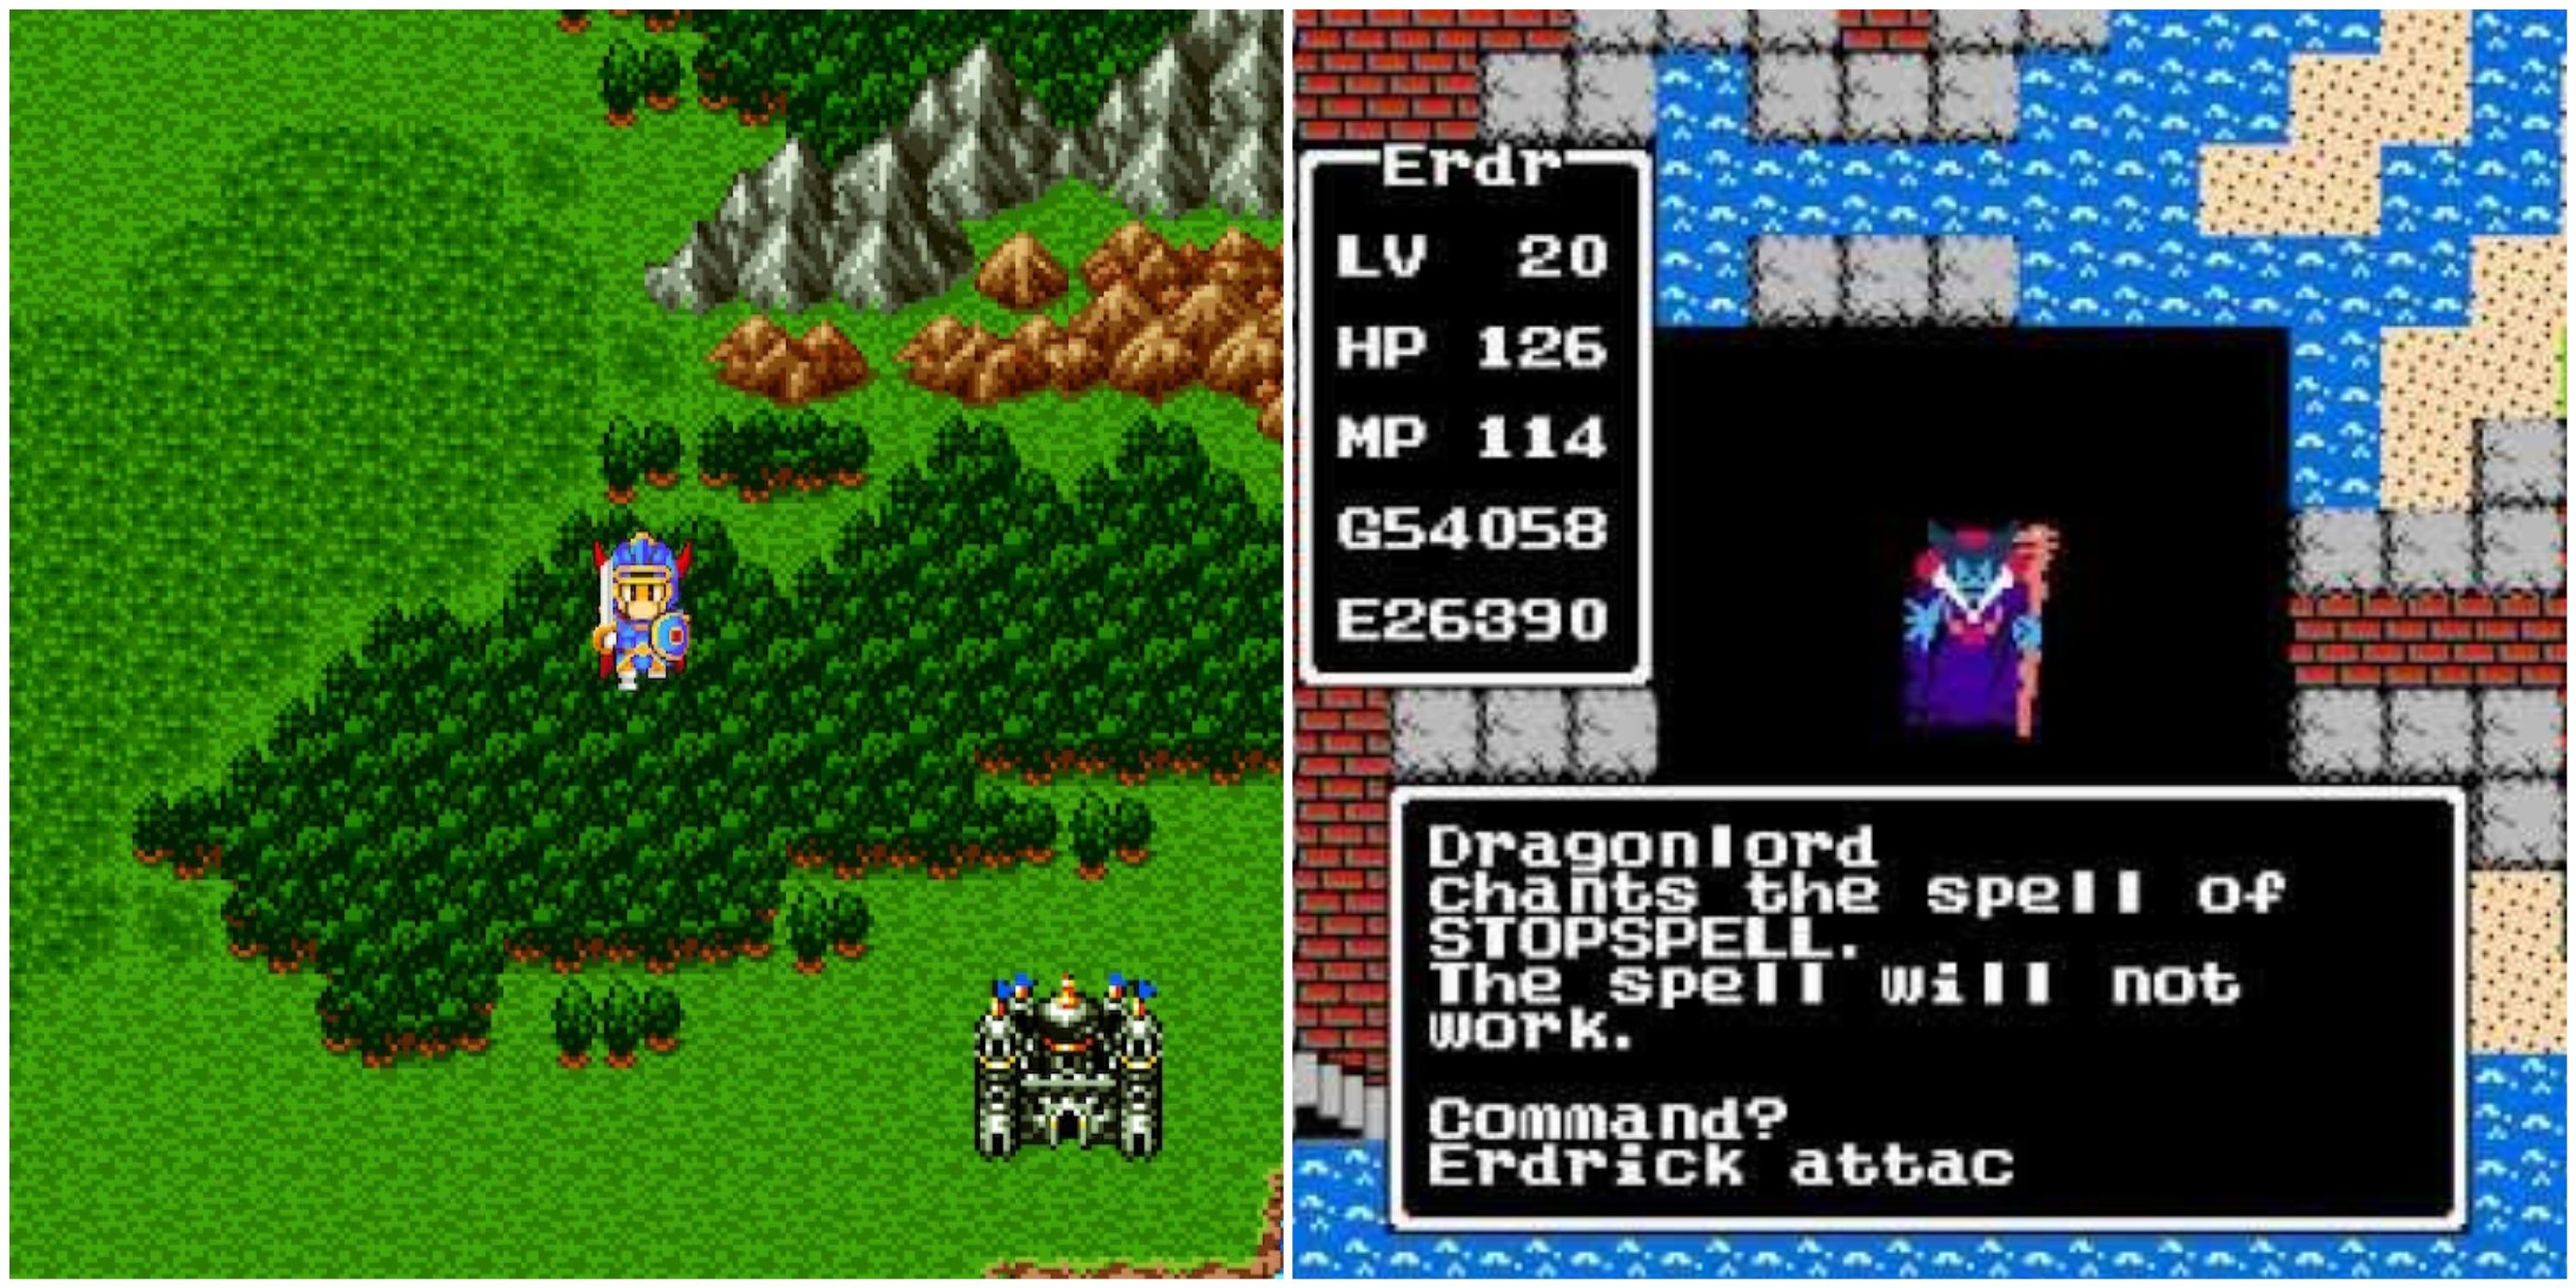 The player character and Dragonlord in Dragon Quest